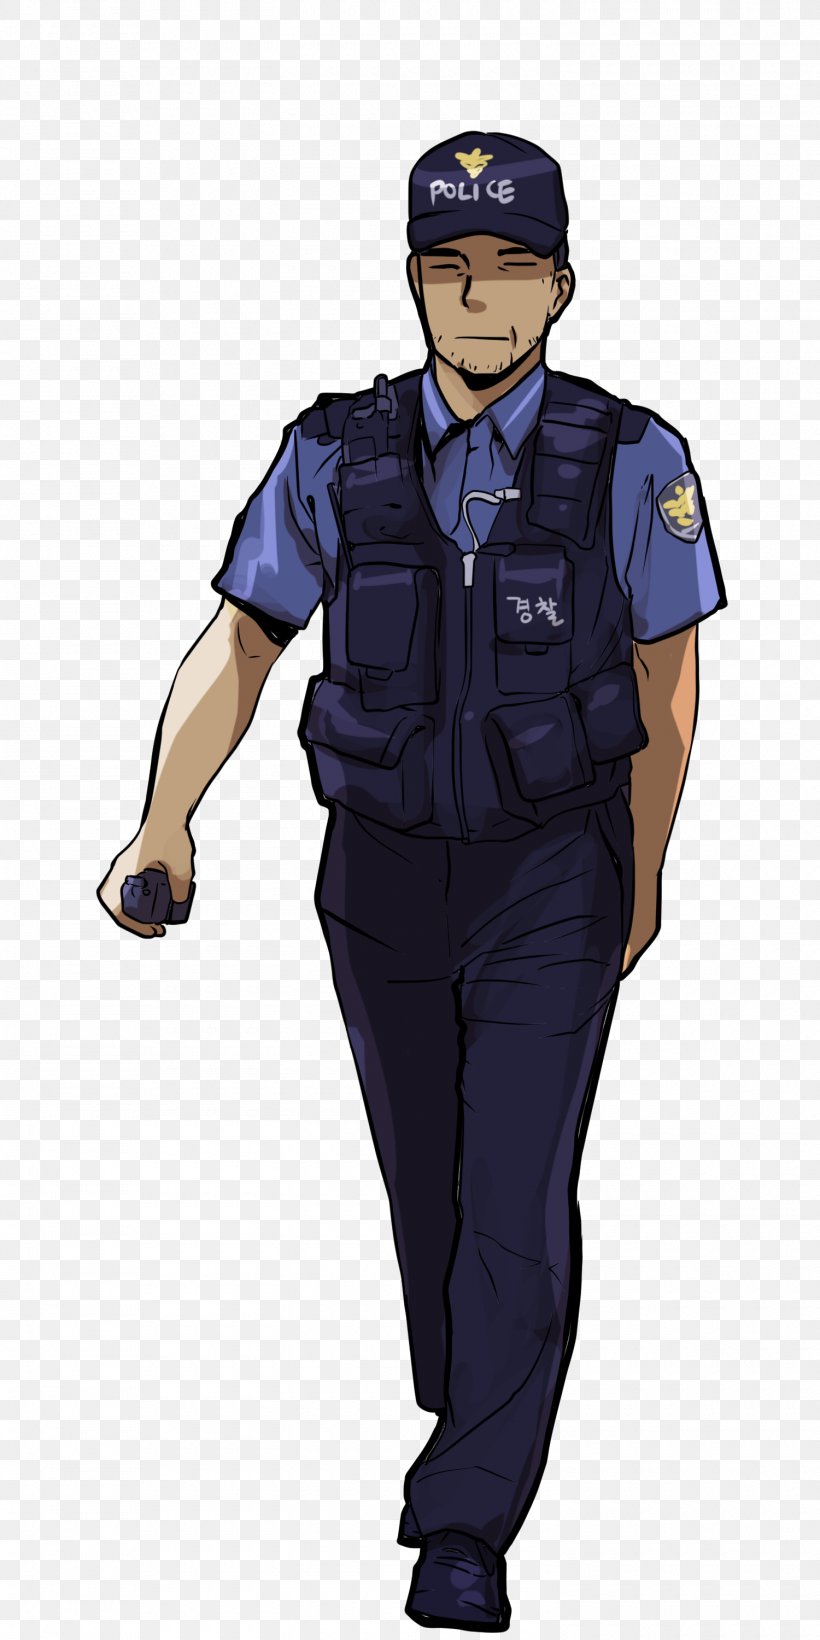 Police Officer Military Uniform Security, PNG, 1500x3000px, Police Officer, Baseball Equipment, Electric Blue, Military, Military Uniform Download Free